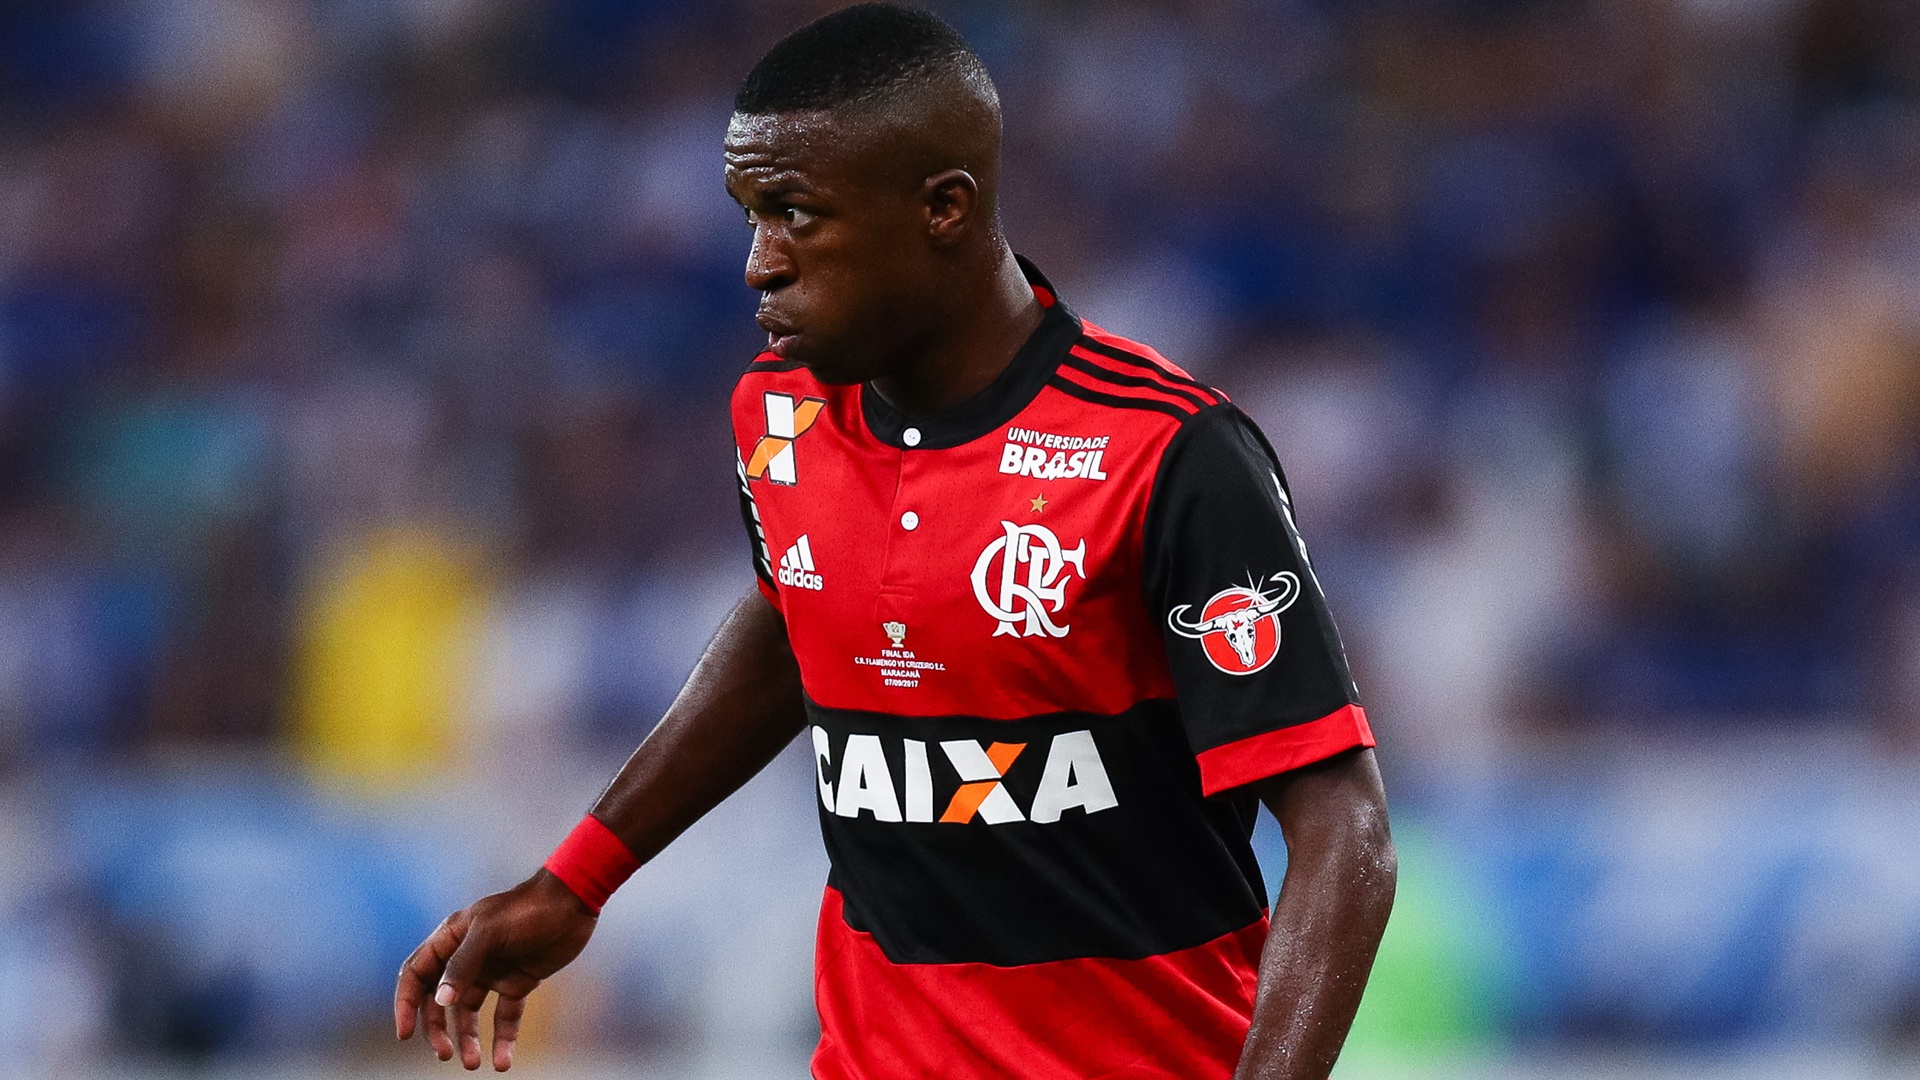 Real Madrid starlet Vinicius to miss U-17 World Cup